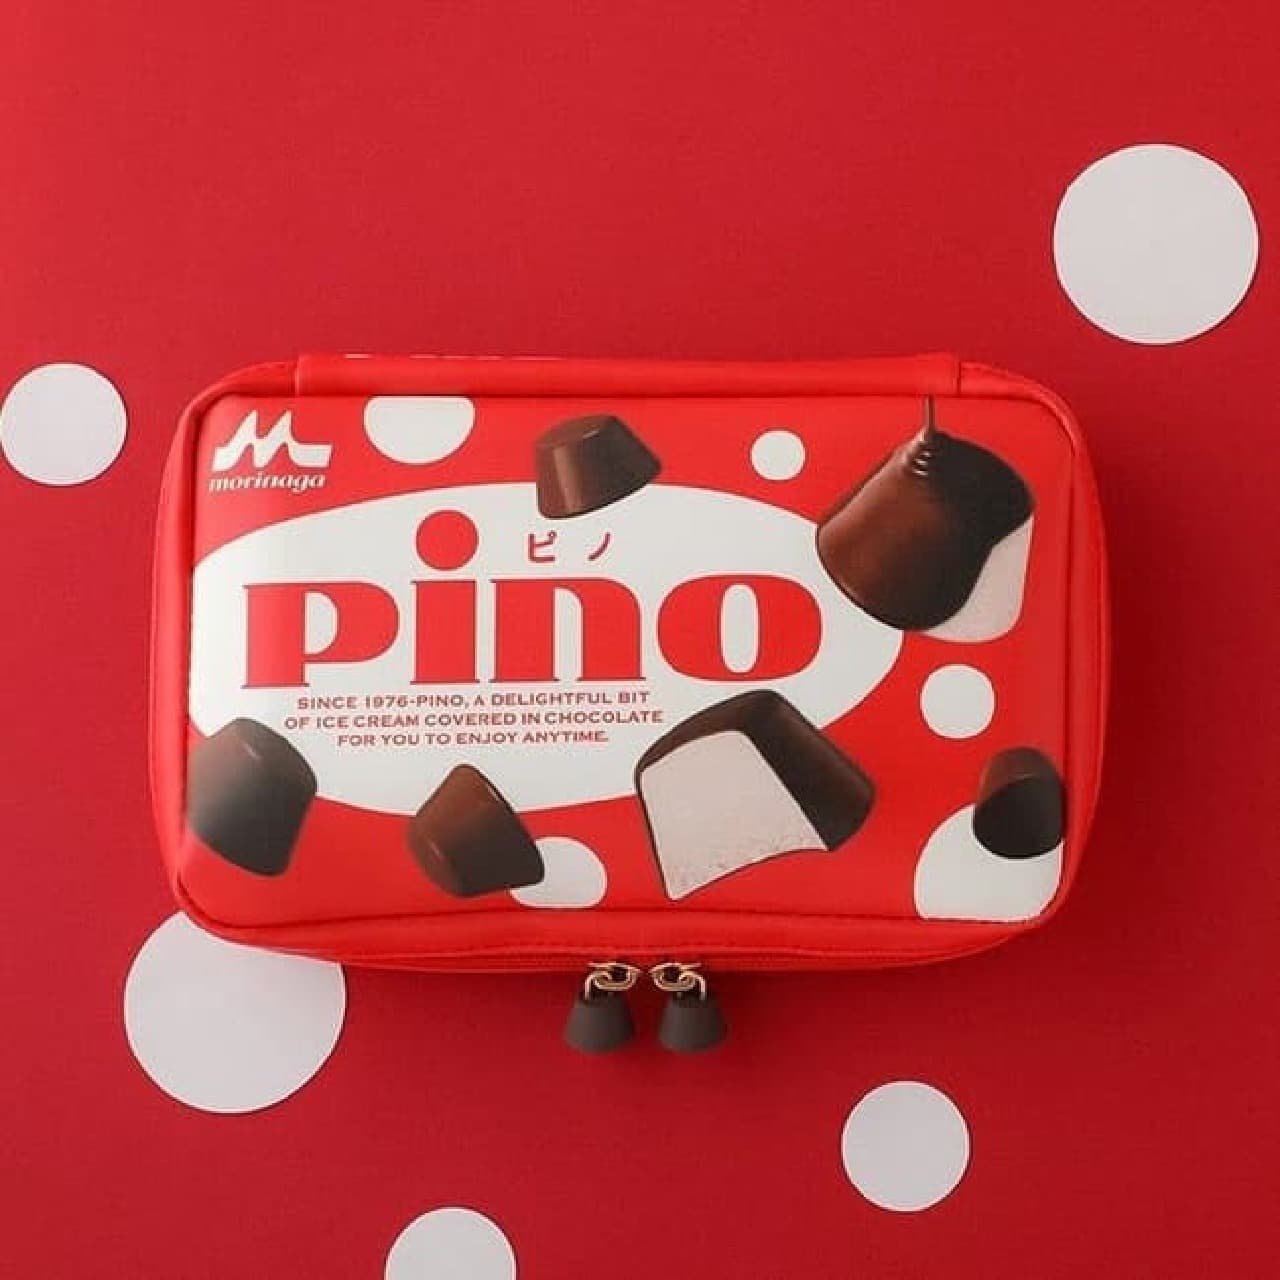 pino 45th anniversary book" at Seven-Eleven and other stores -- Official Pino Brand Book! Comes with a cute multi-pouch!